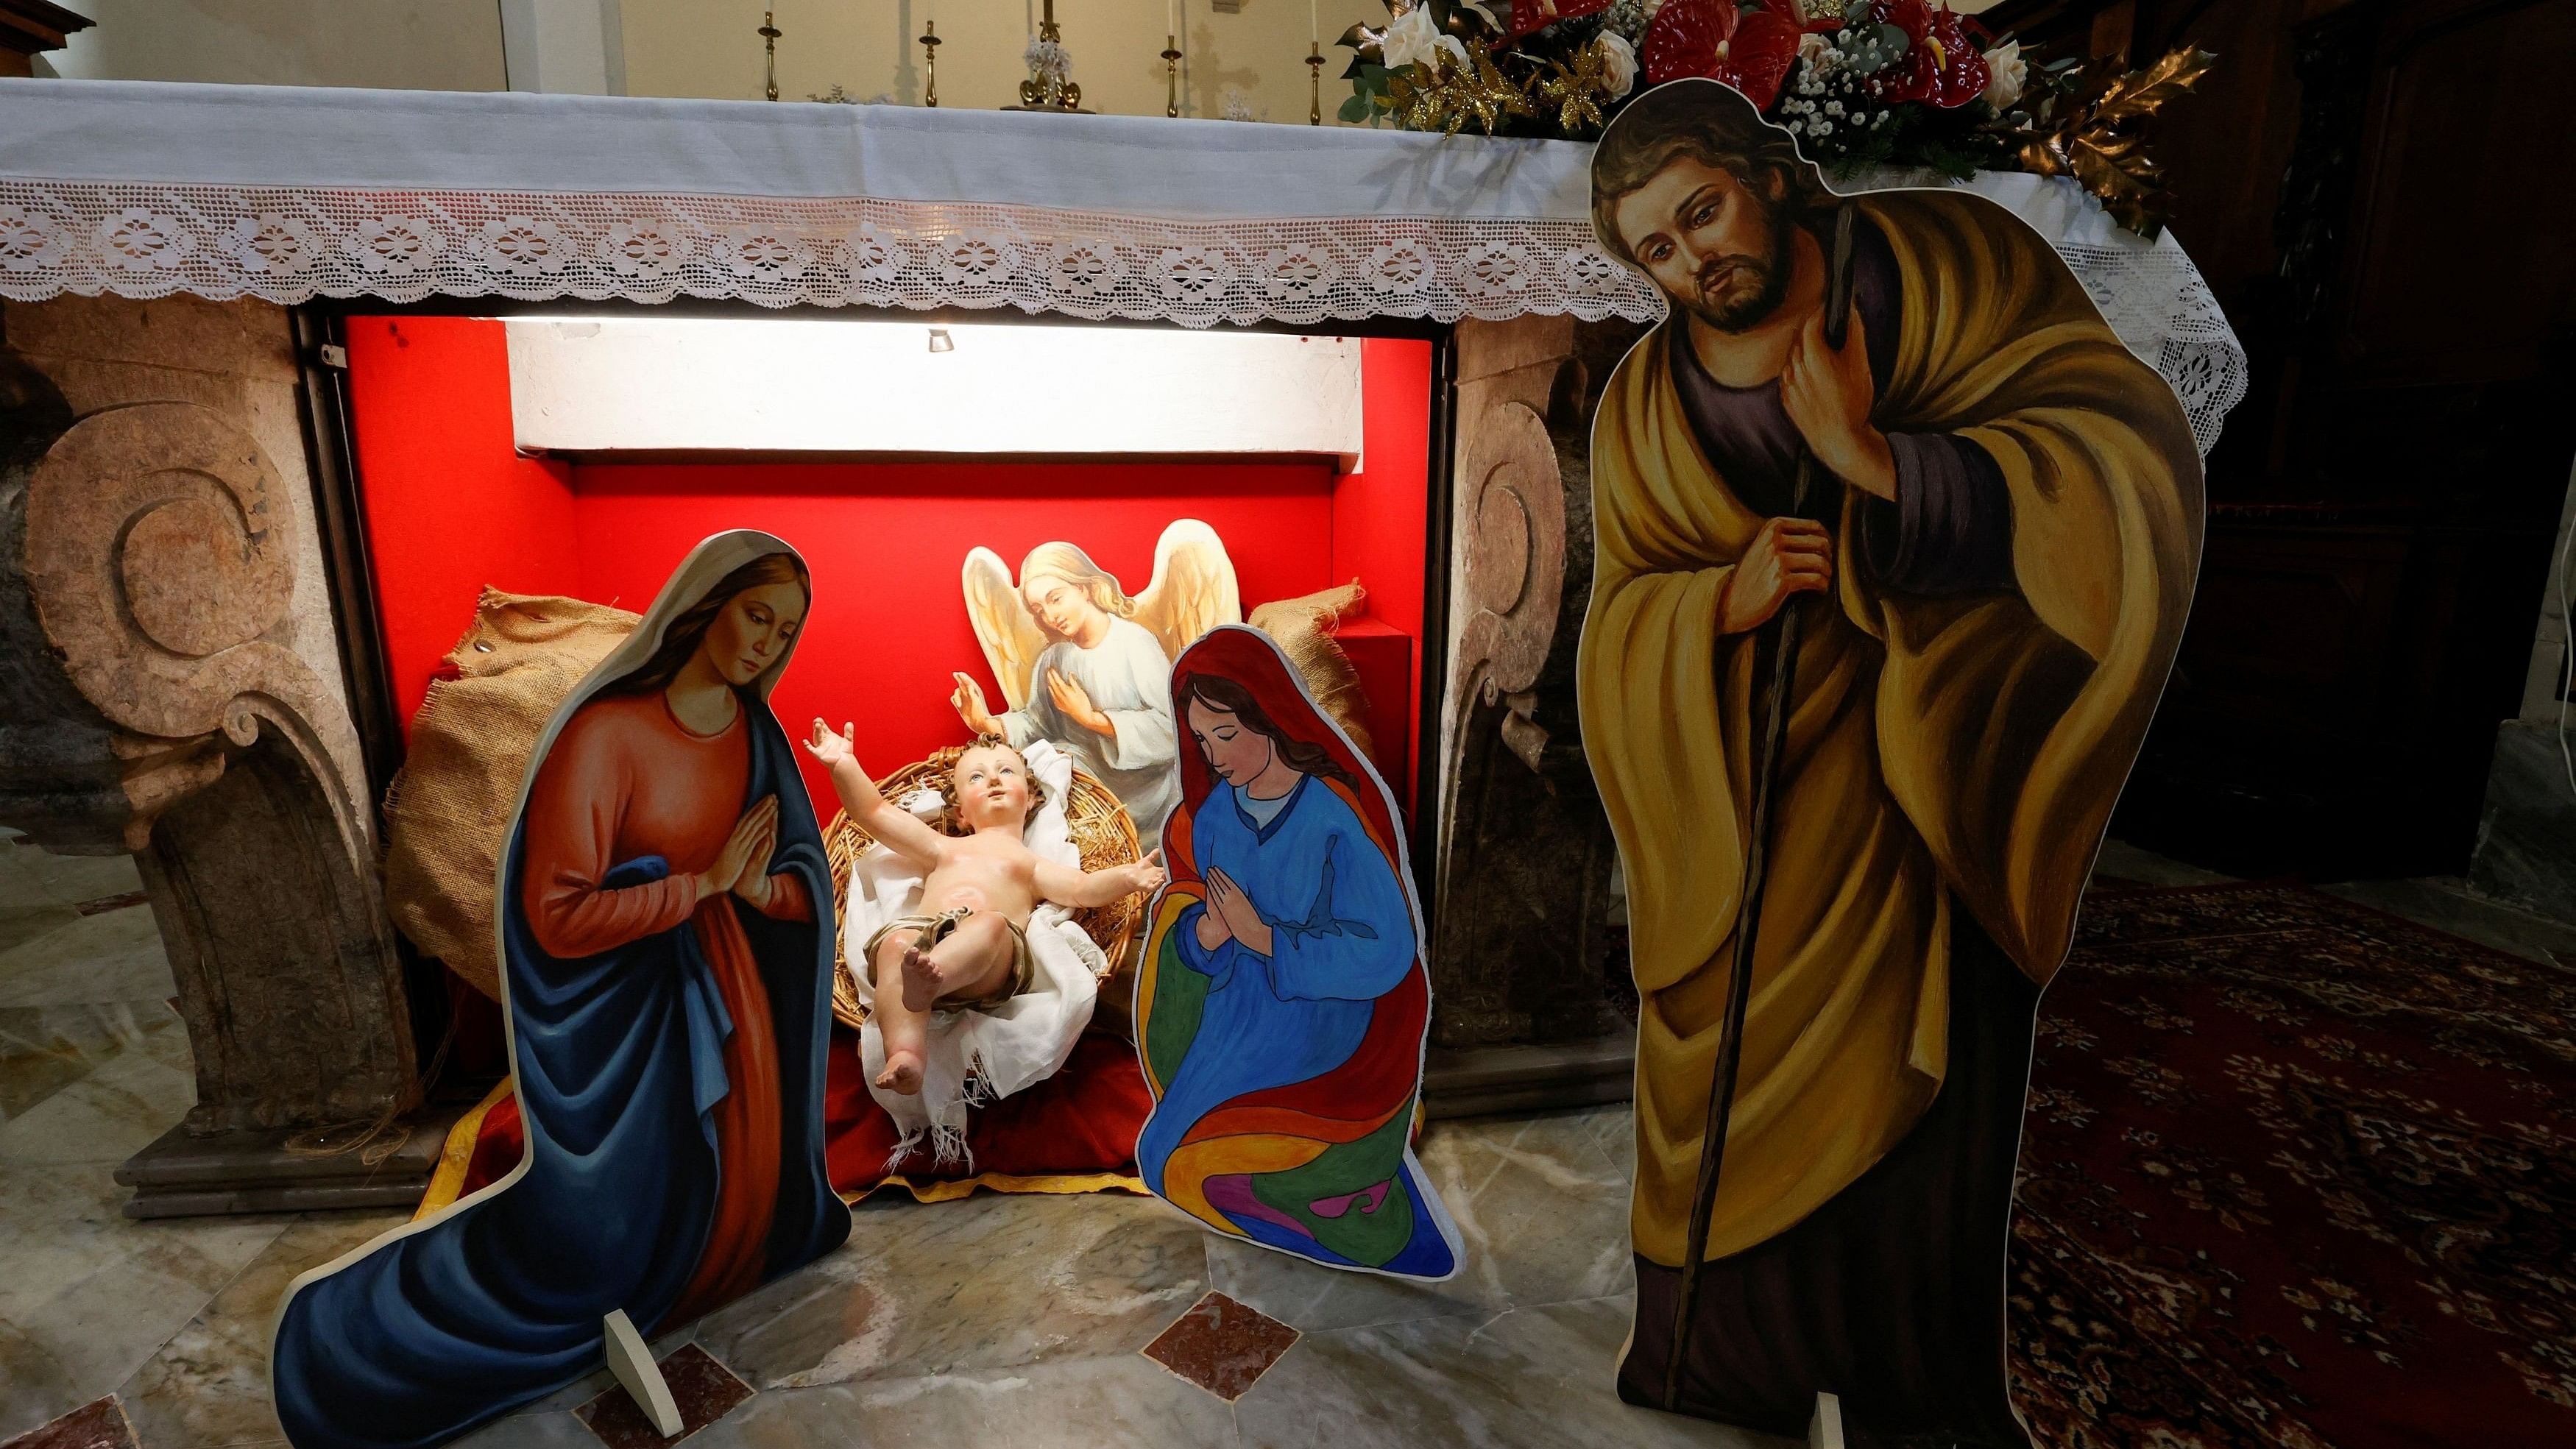 <div class="paragraphs"><p>A nativity scene featuring two mothers of the Baby Jesus, instead of the conventional Mary and Joseph figurines, goes on display in the Church of Saints Peter and Paul in Capocastello di Mercogliano, Italy.</p></div>